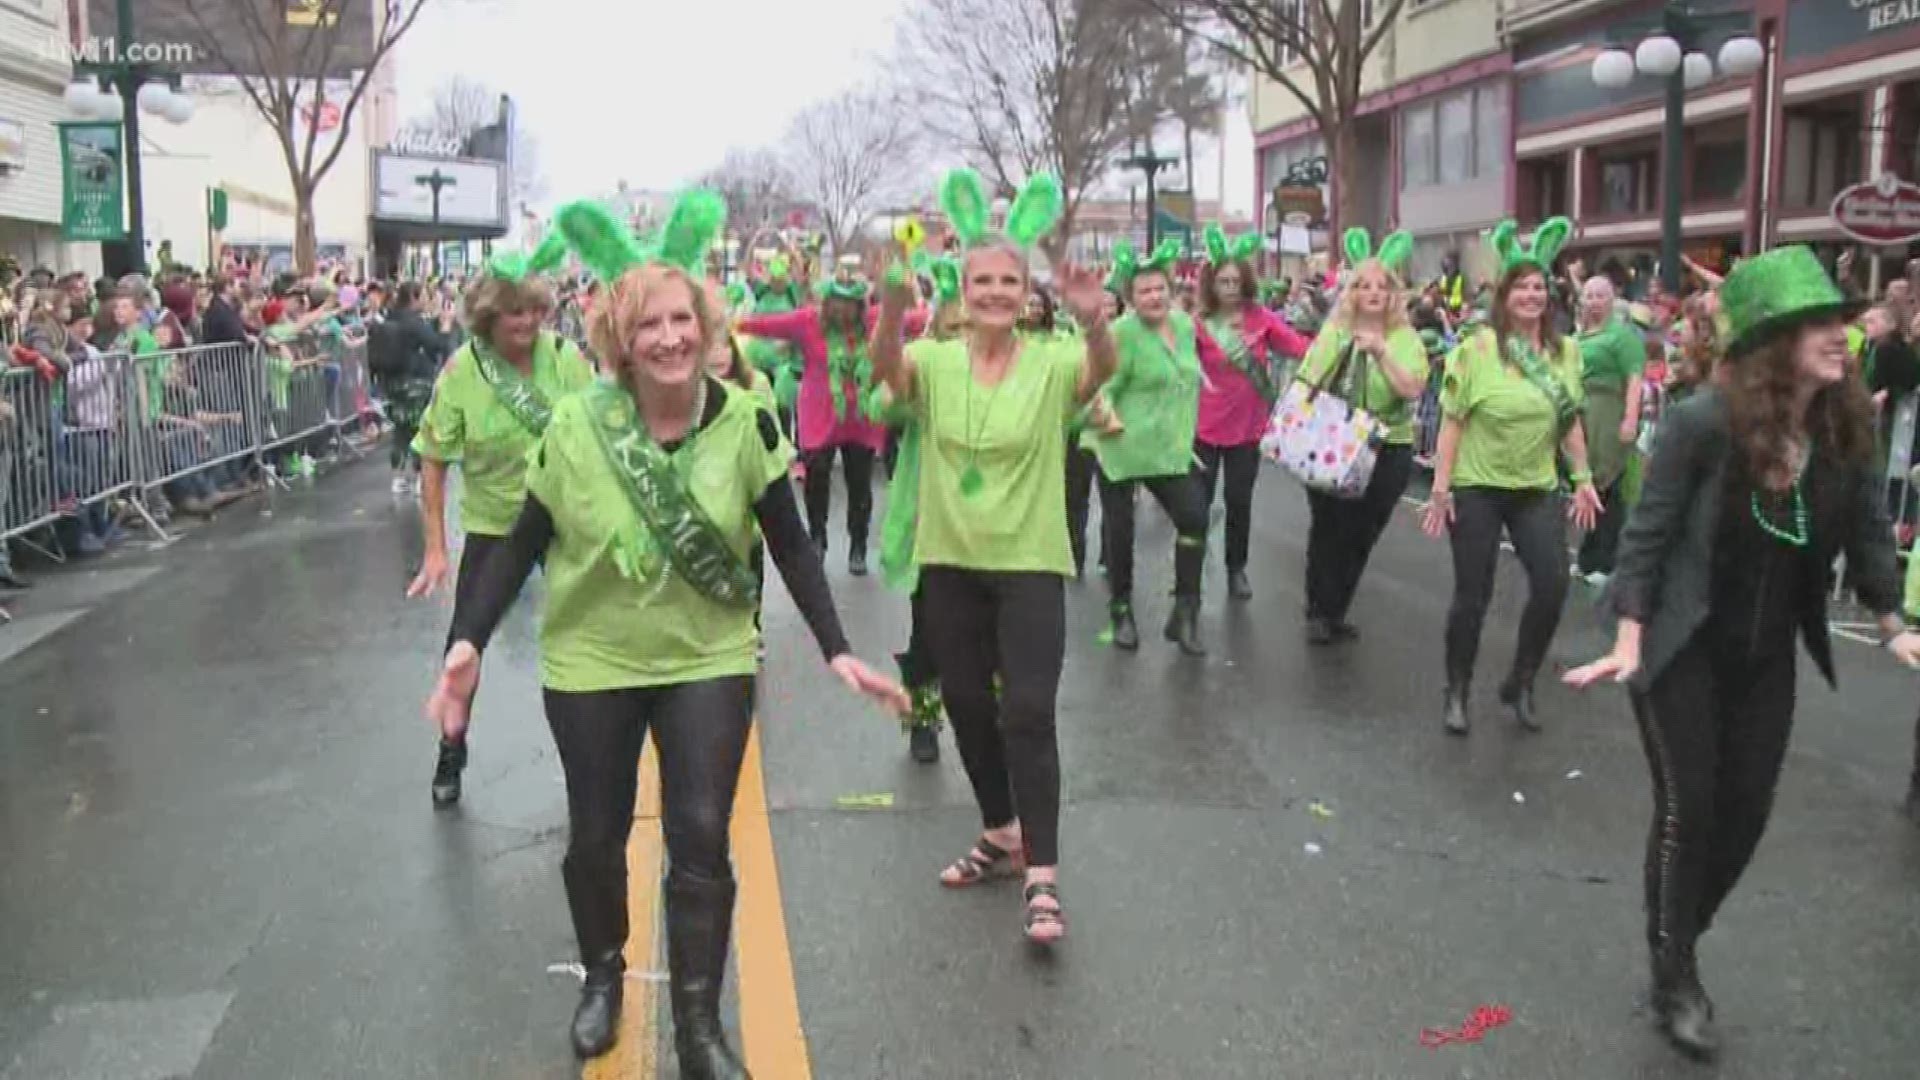 Hot Springs prepares for more than 30,000 people at St. Patrick’s Day